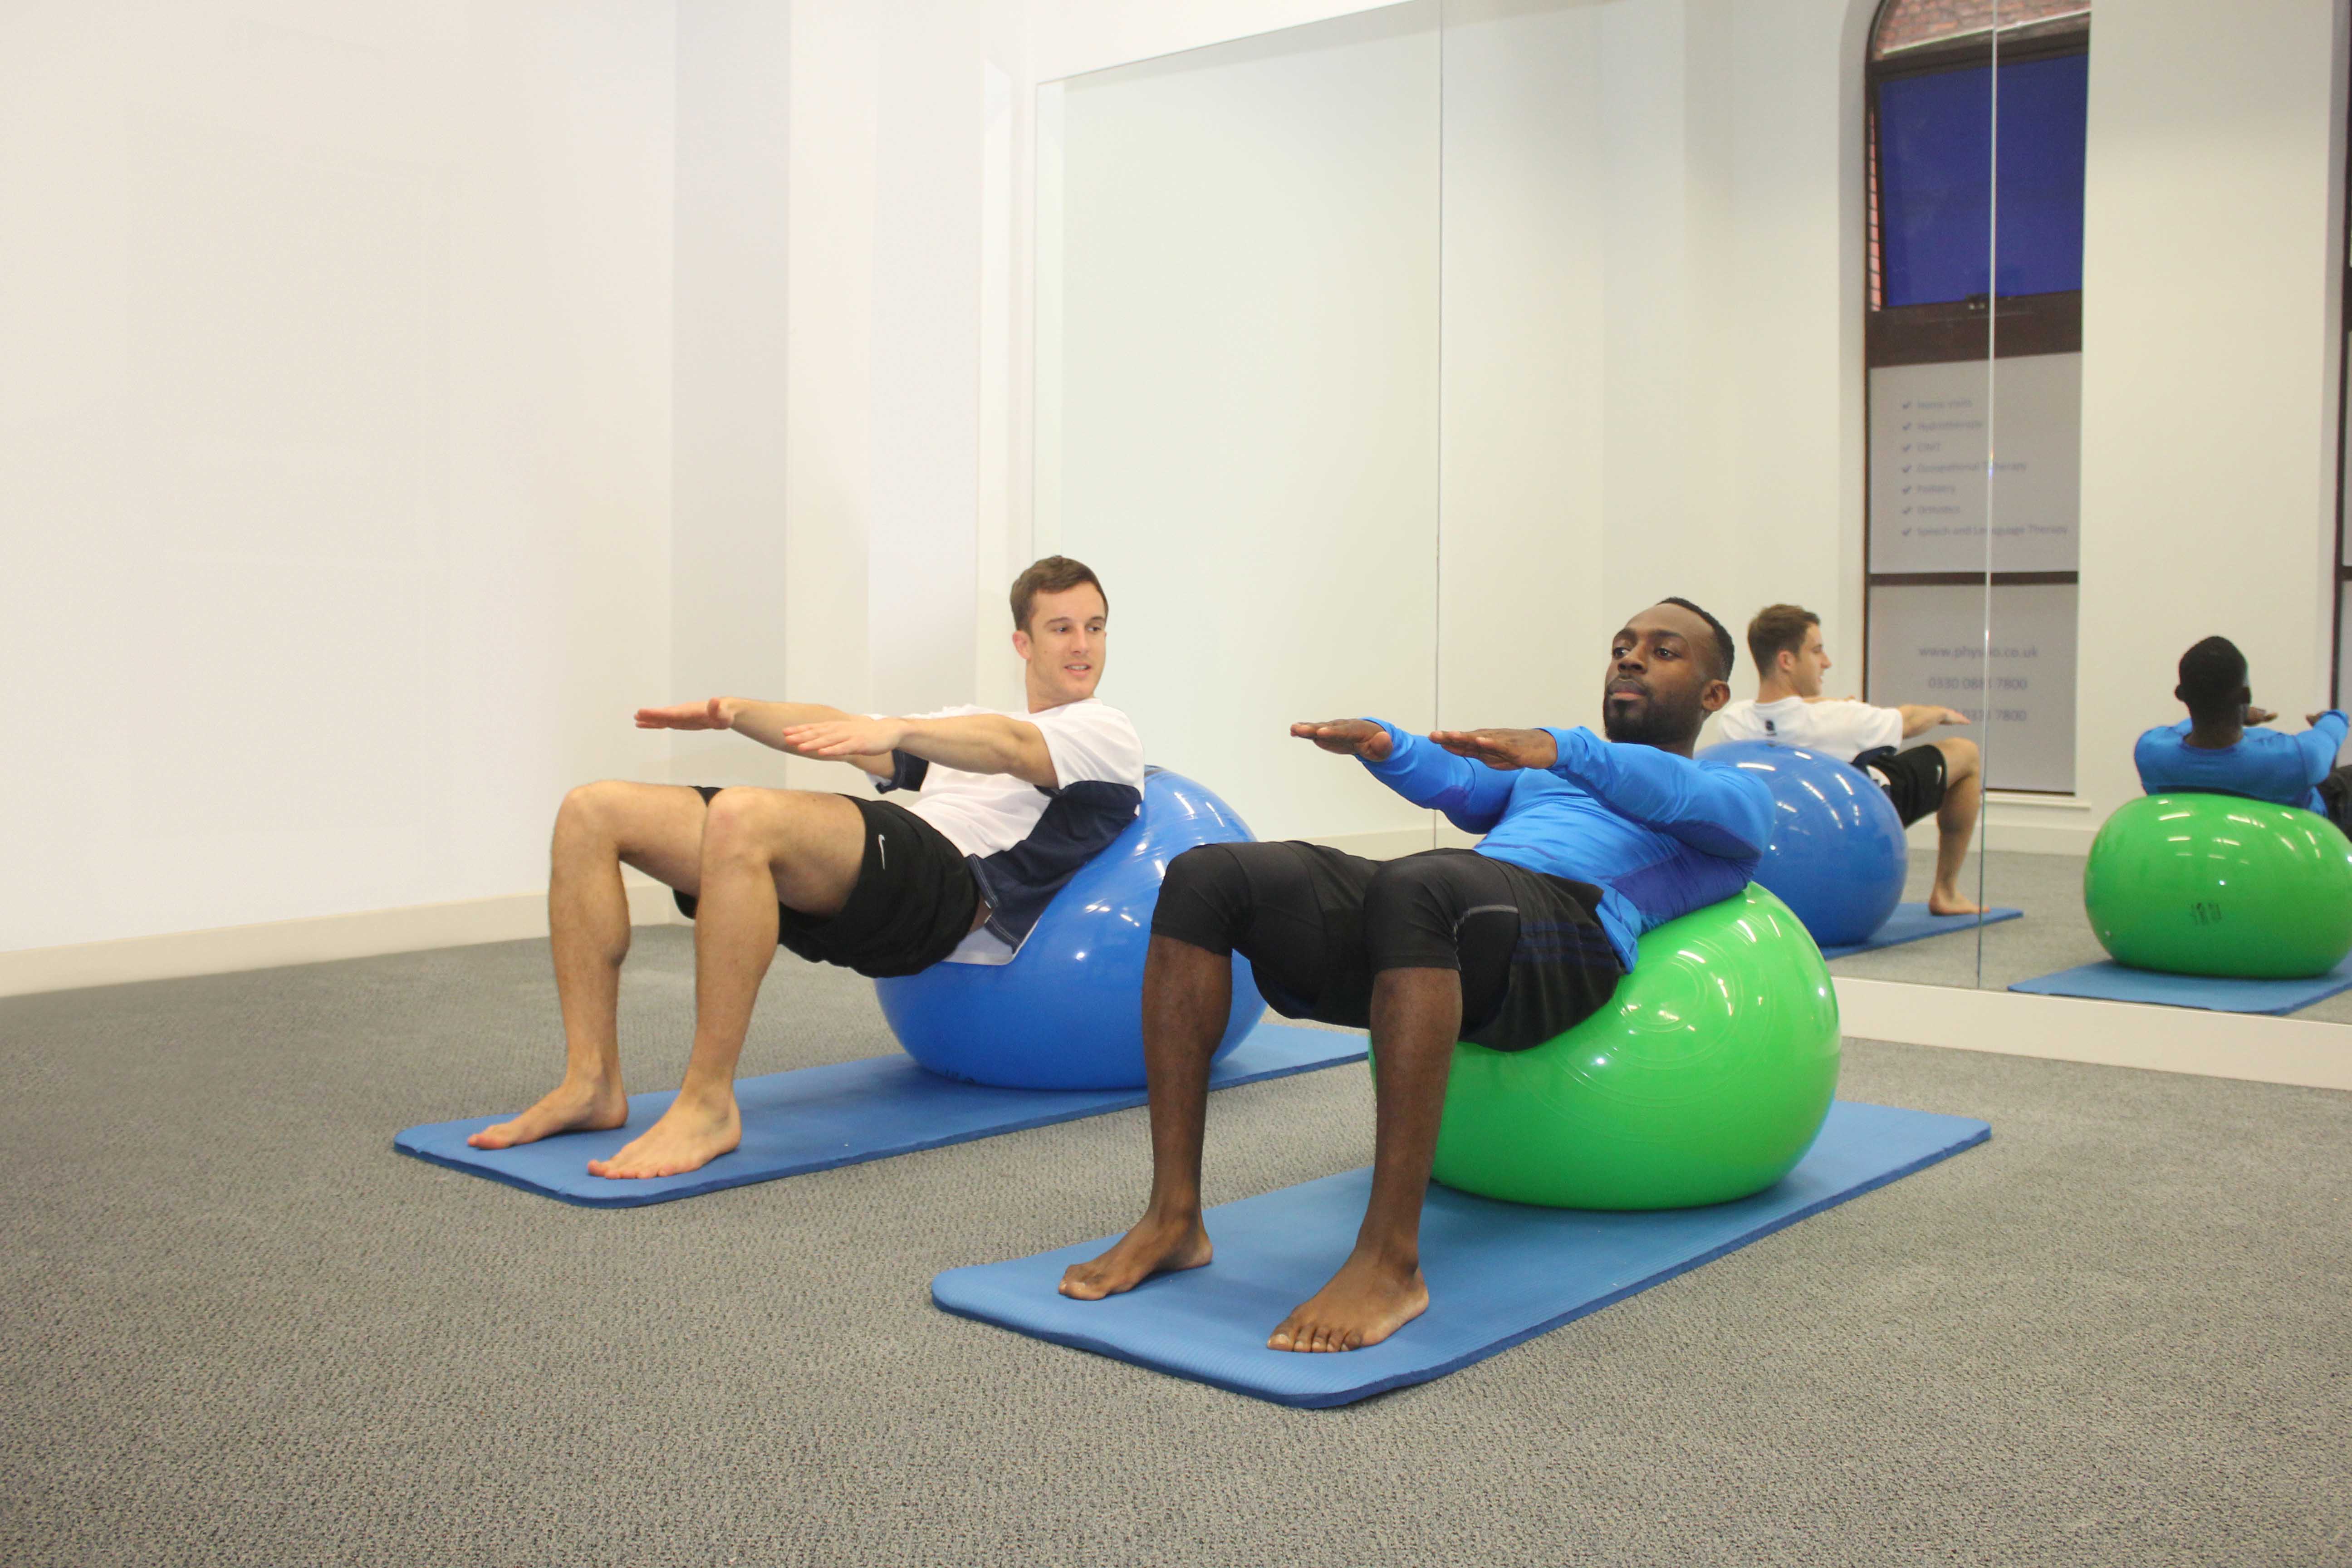 One to one physiolates sessions with a specialist Pilates qualified physiotherapist